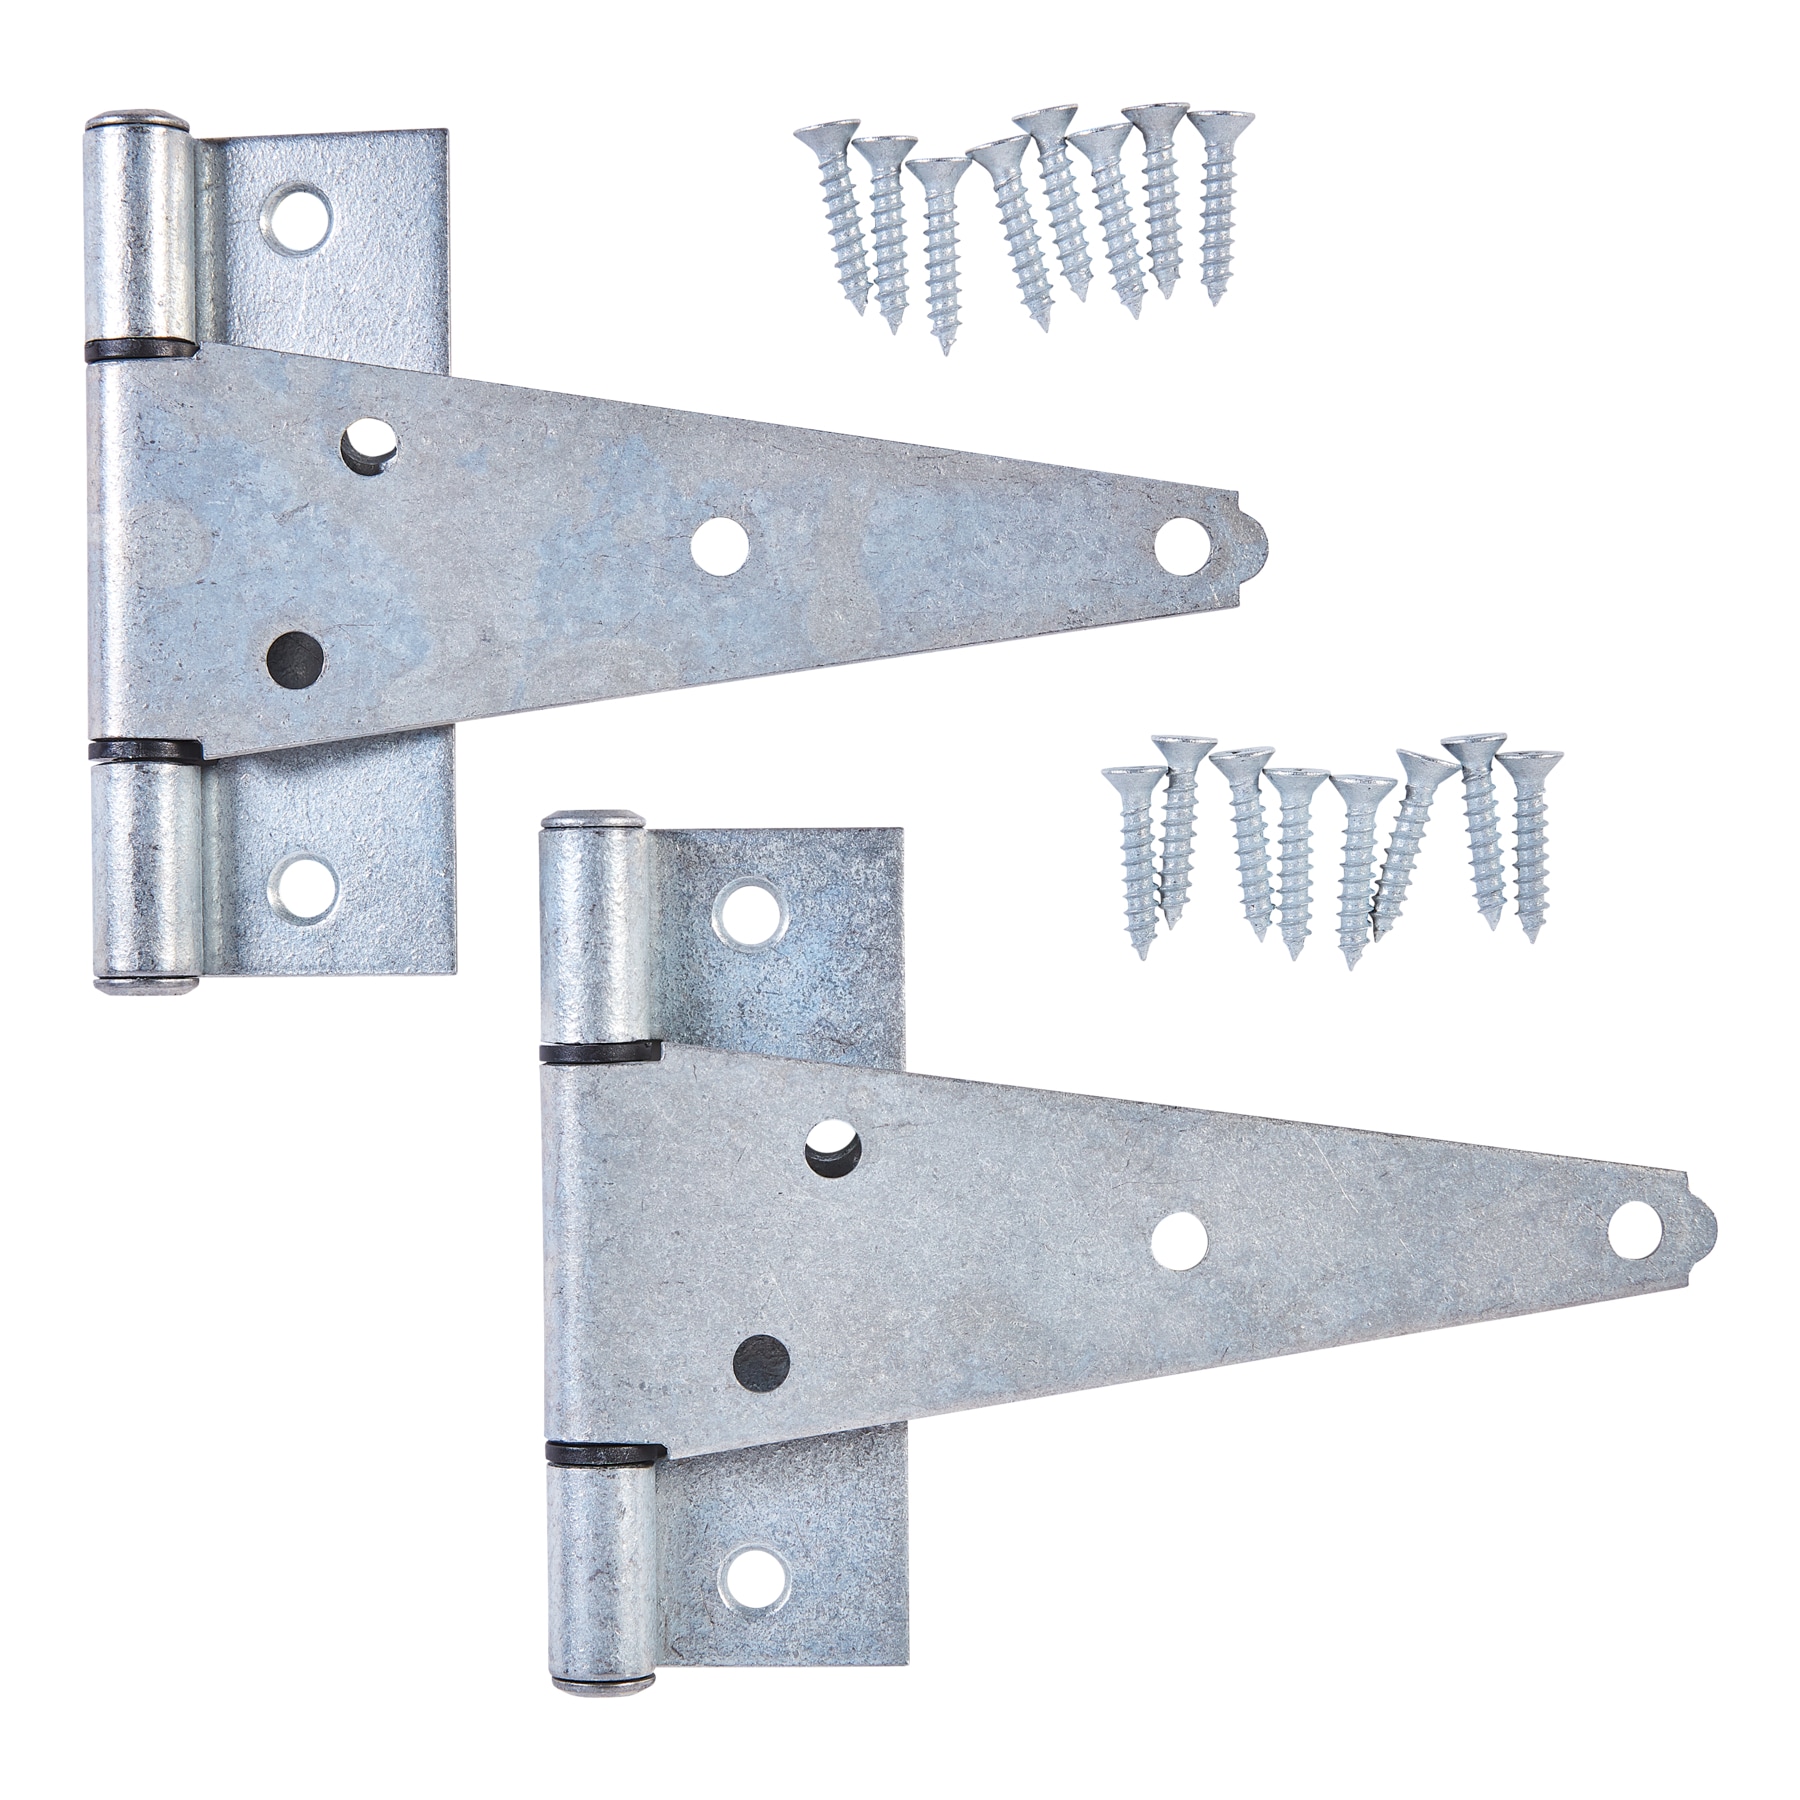 4 Pack of 12 inch Strap Hinges Heavy Duty Zinc Plated Hardware Door Fence  Barn Gate